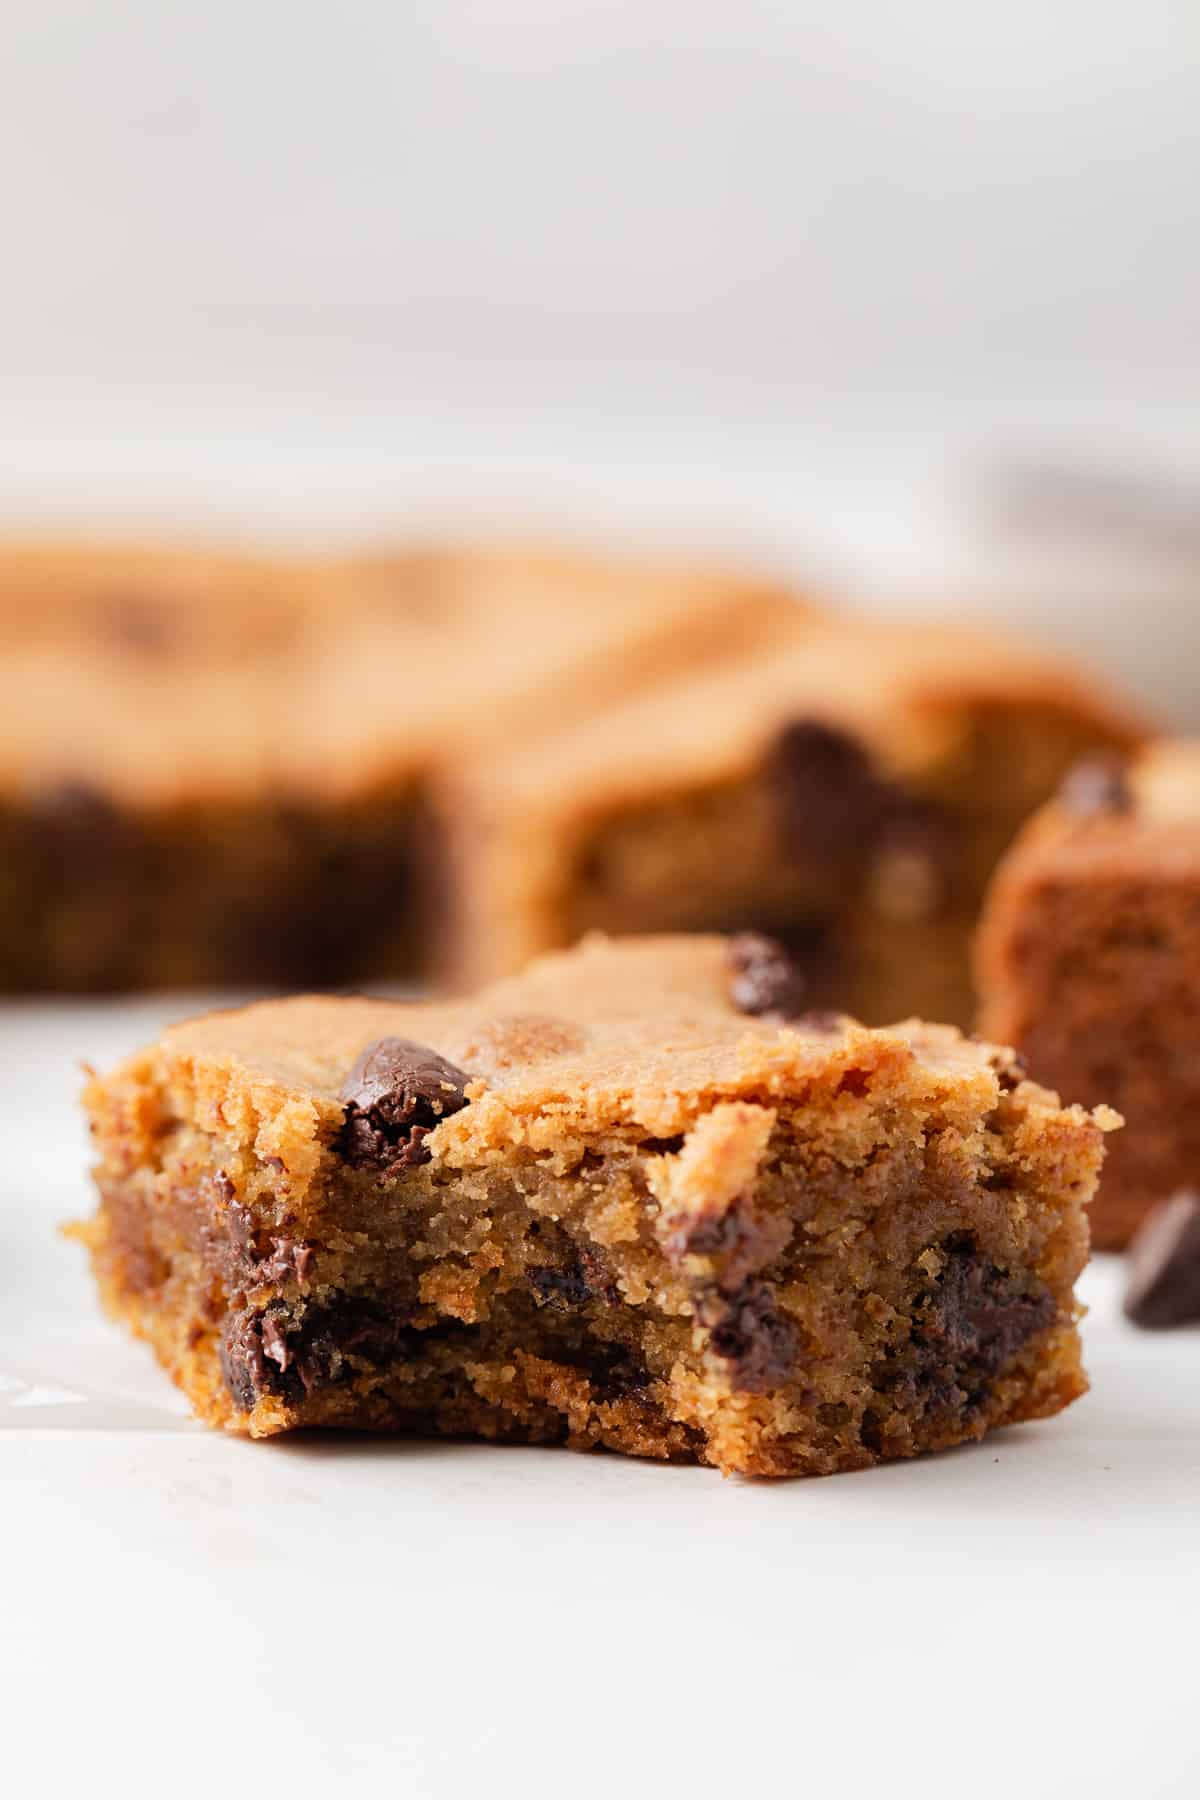 Peanut butter chocolate chip blondie with a bite taken out.